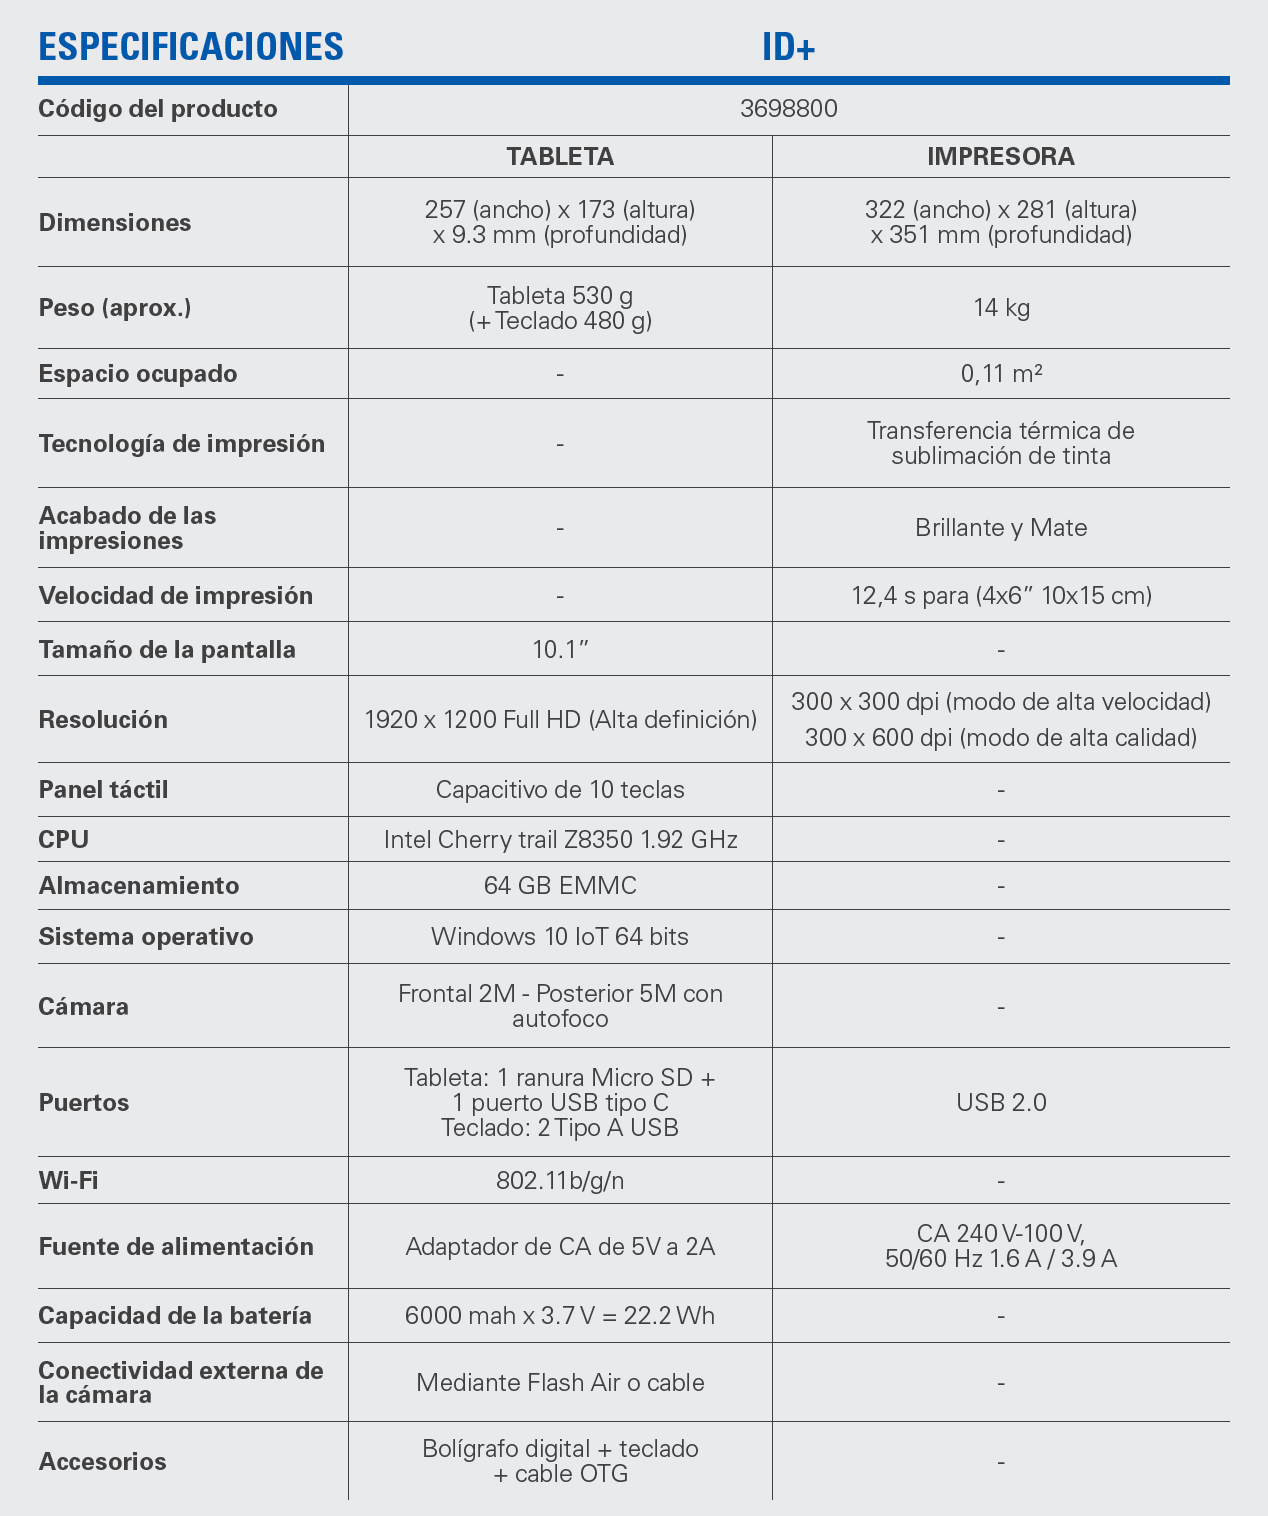 ID specifications ES